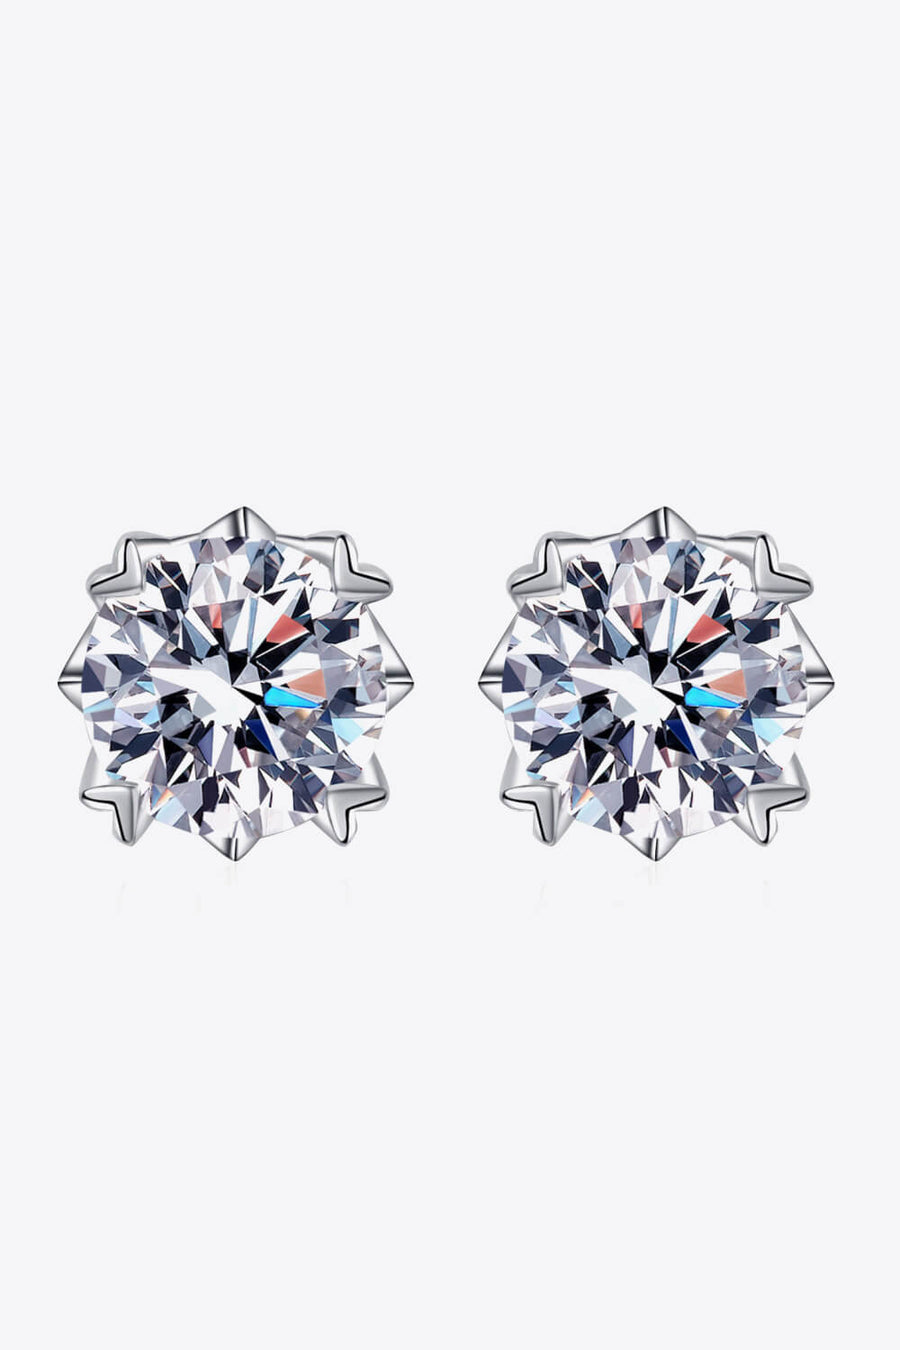 Sterling silver earrings, Lab-created gemstones, 4-carat statement studs, Sparkling centerpiece, Elegant stud design, Affordable luxury earrings, High-quality craftsmanship, Timeless beauty, Fine jewelry accessory, Moissanite stud earrings.